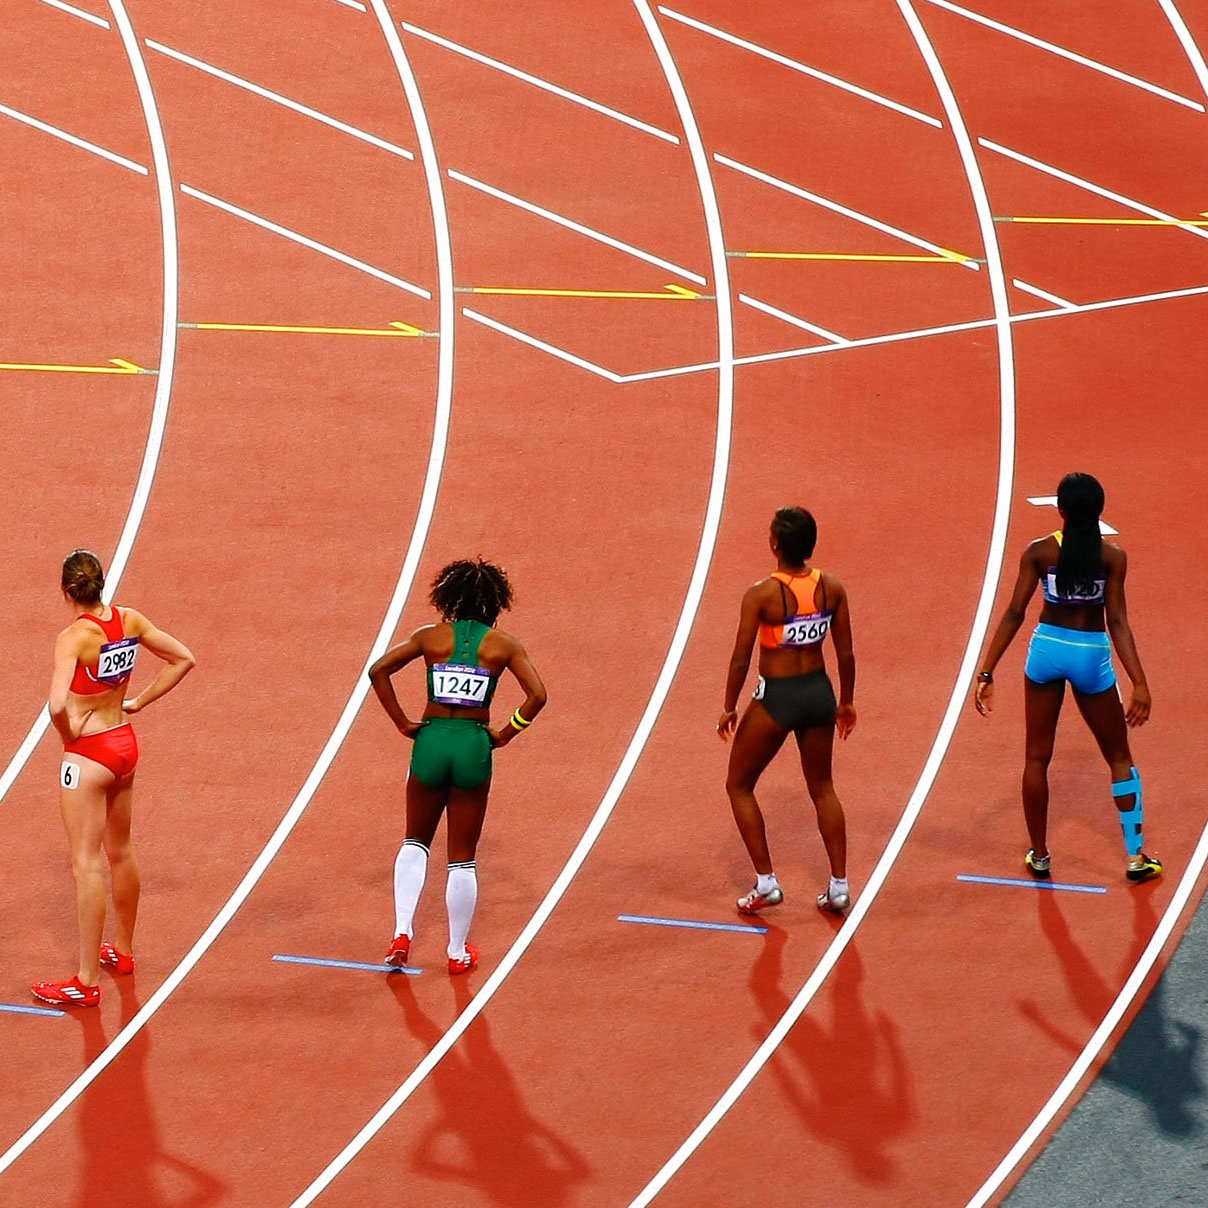 Image of women on a running track